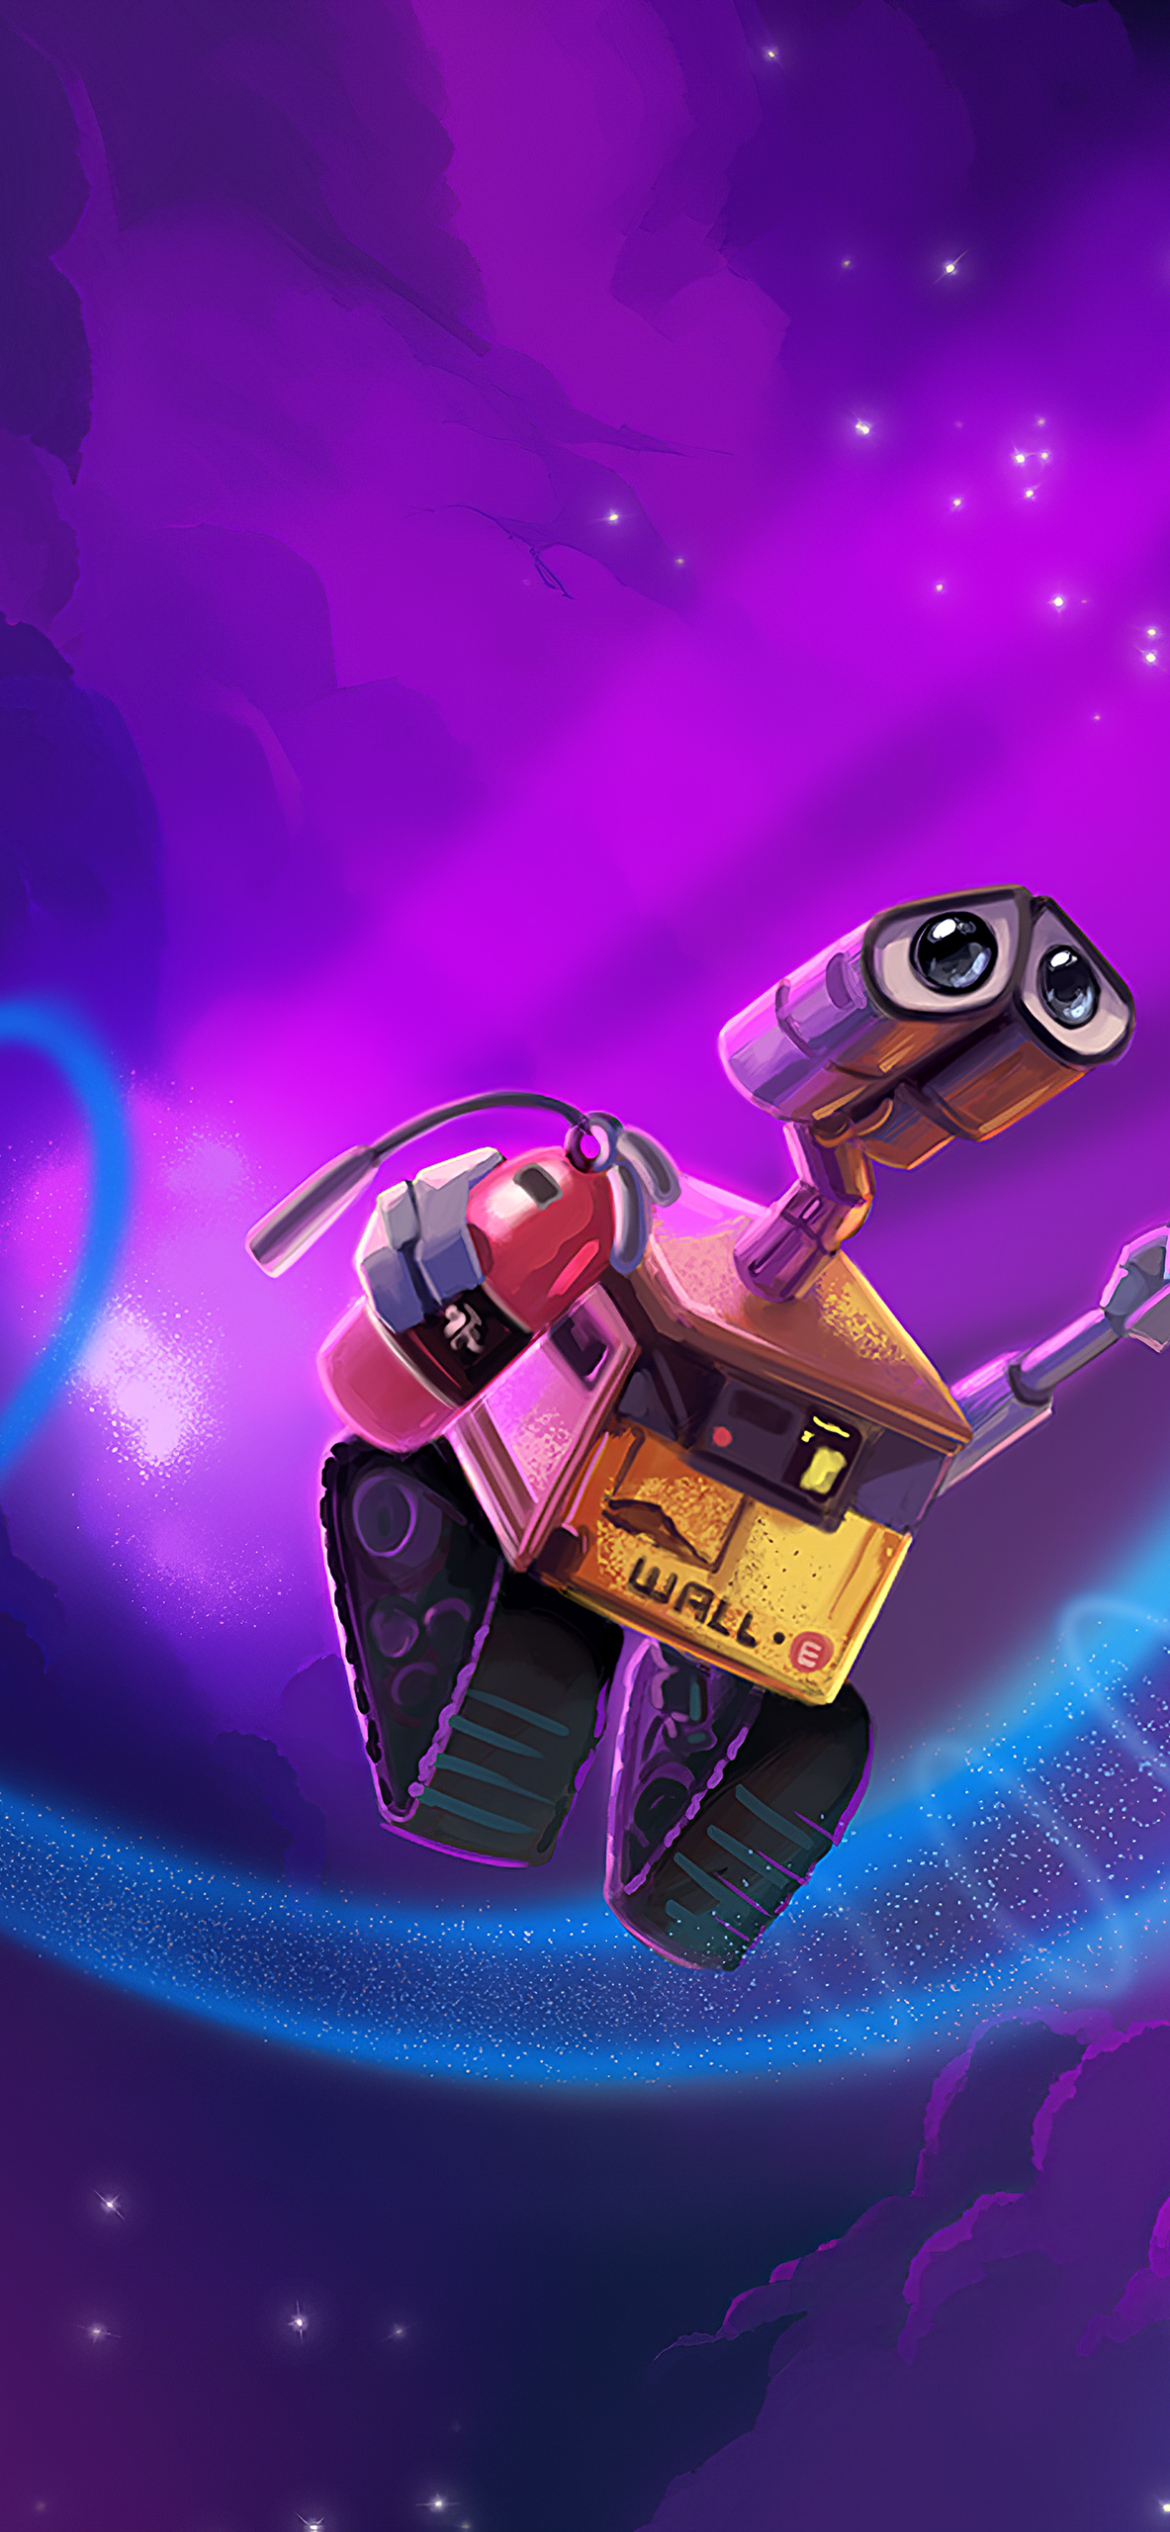 Wall·E Phone Wallpaper by Eric Proctor